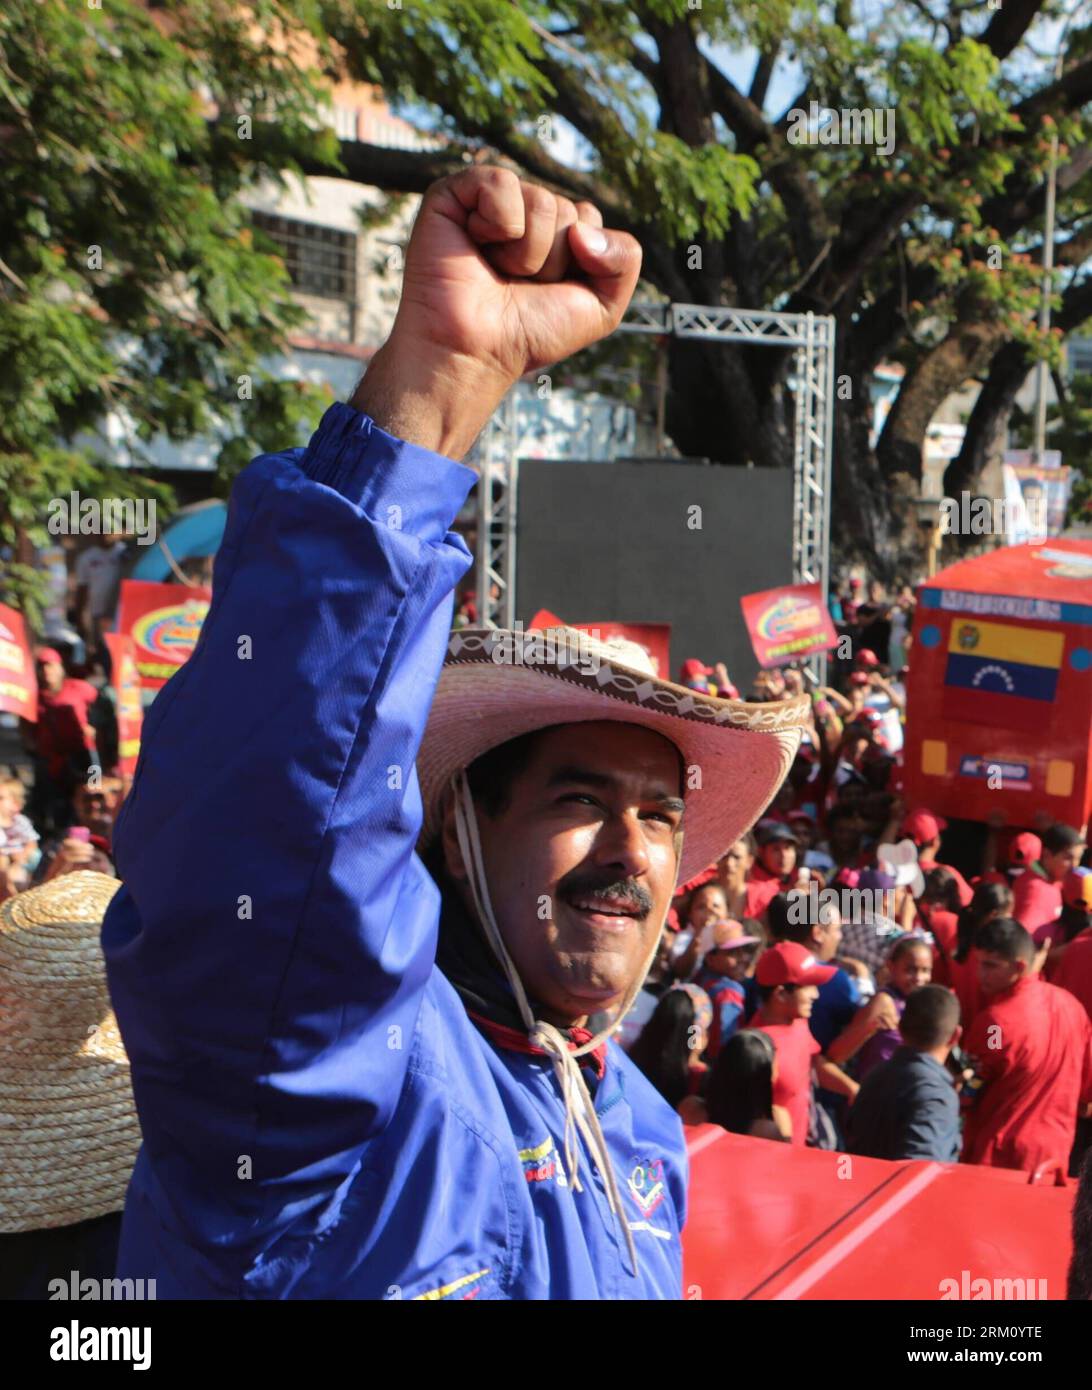 Bildnummer: 59482944  Datum: 07.04.2013  Copyright: imago/Xinhua Image provided by Hugo Chavez Campaign Comand shows Venezuelan acting President and presidential candidate Nicolas Maduro attending his closing campaign, in San Juan de los Morros, state of Guaruco, Venezuela, on April 7, 2013. (Xinhua/Hugo Chavez Campaign Comand) (ah) (sp) VENEZUELA-GUARICO-ELECTION RALLY-MADURO PUBLICATIONxNOTxINxCHN Politik people Wahl Präsidentschaftswahl Wahlkampf xas x0x 2013 quadrat premiumd     59482944 Date 07 04 2013 Copyright Imago XINHUA Image provided by Hugo Chavez Campaign Comand Shows Venezuelan A Stock Photo